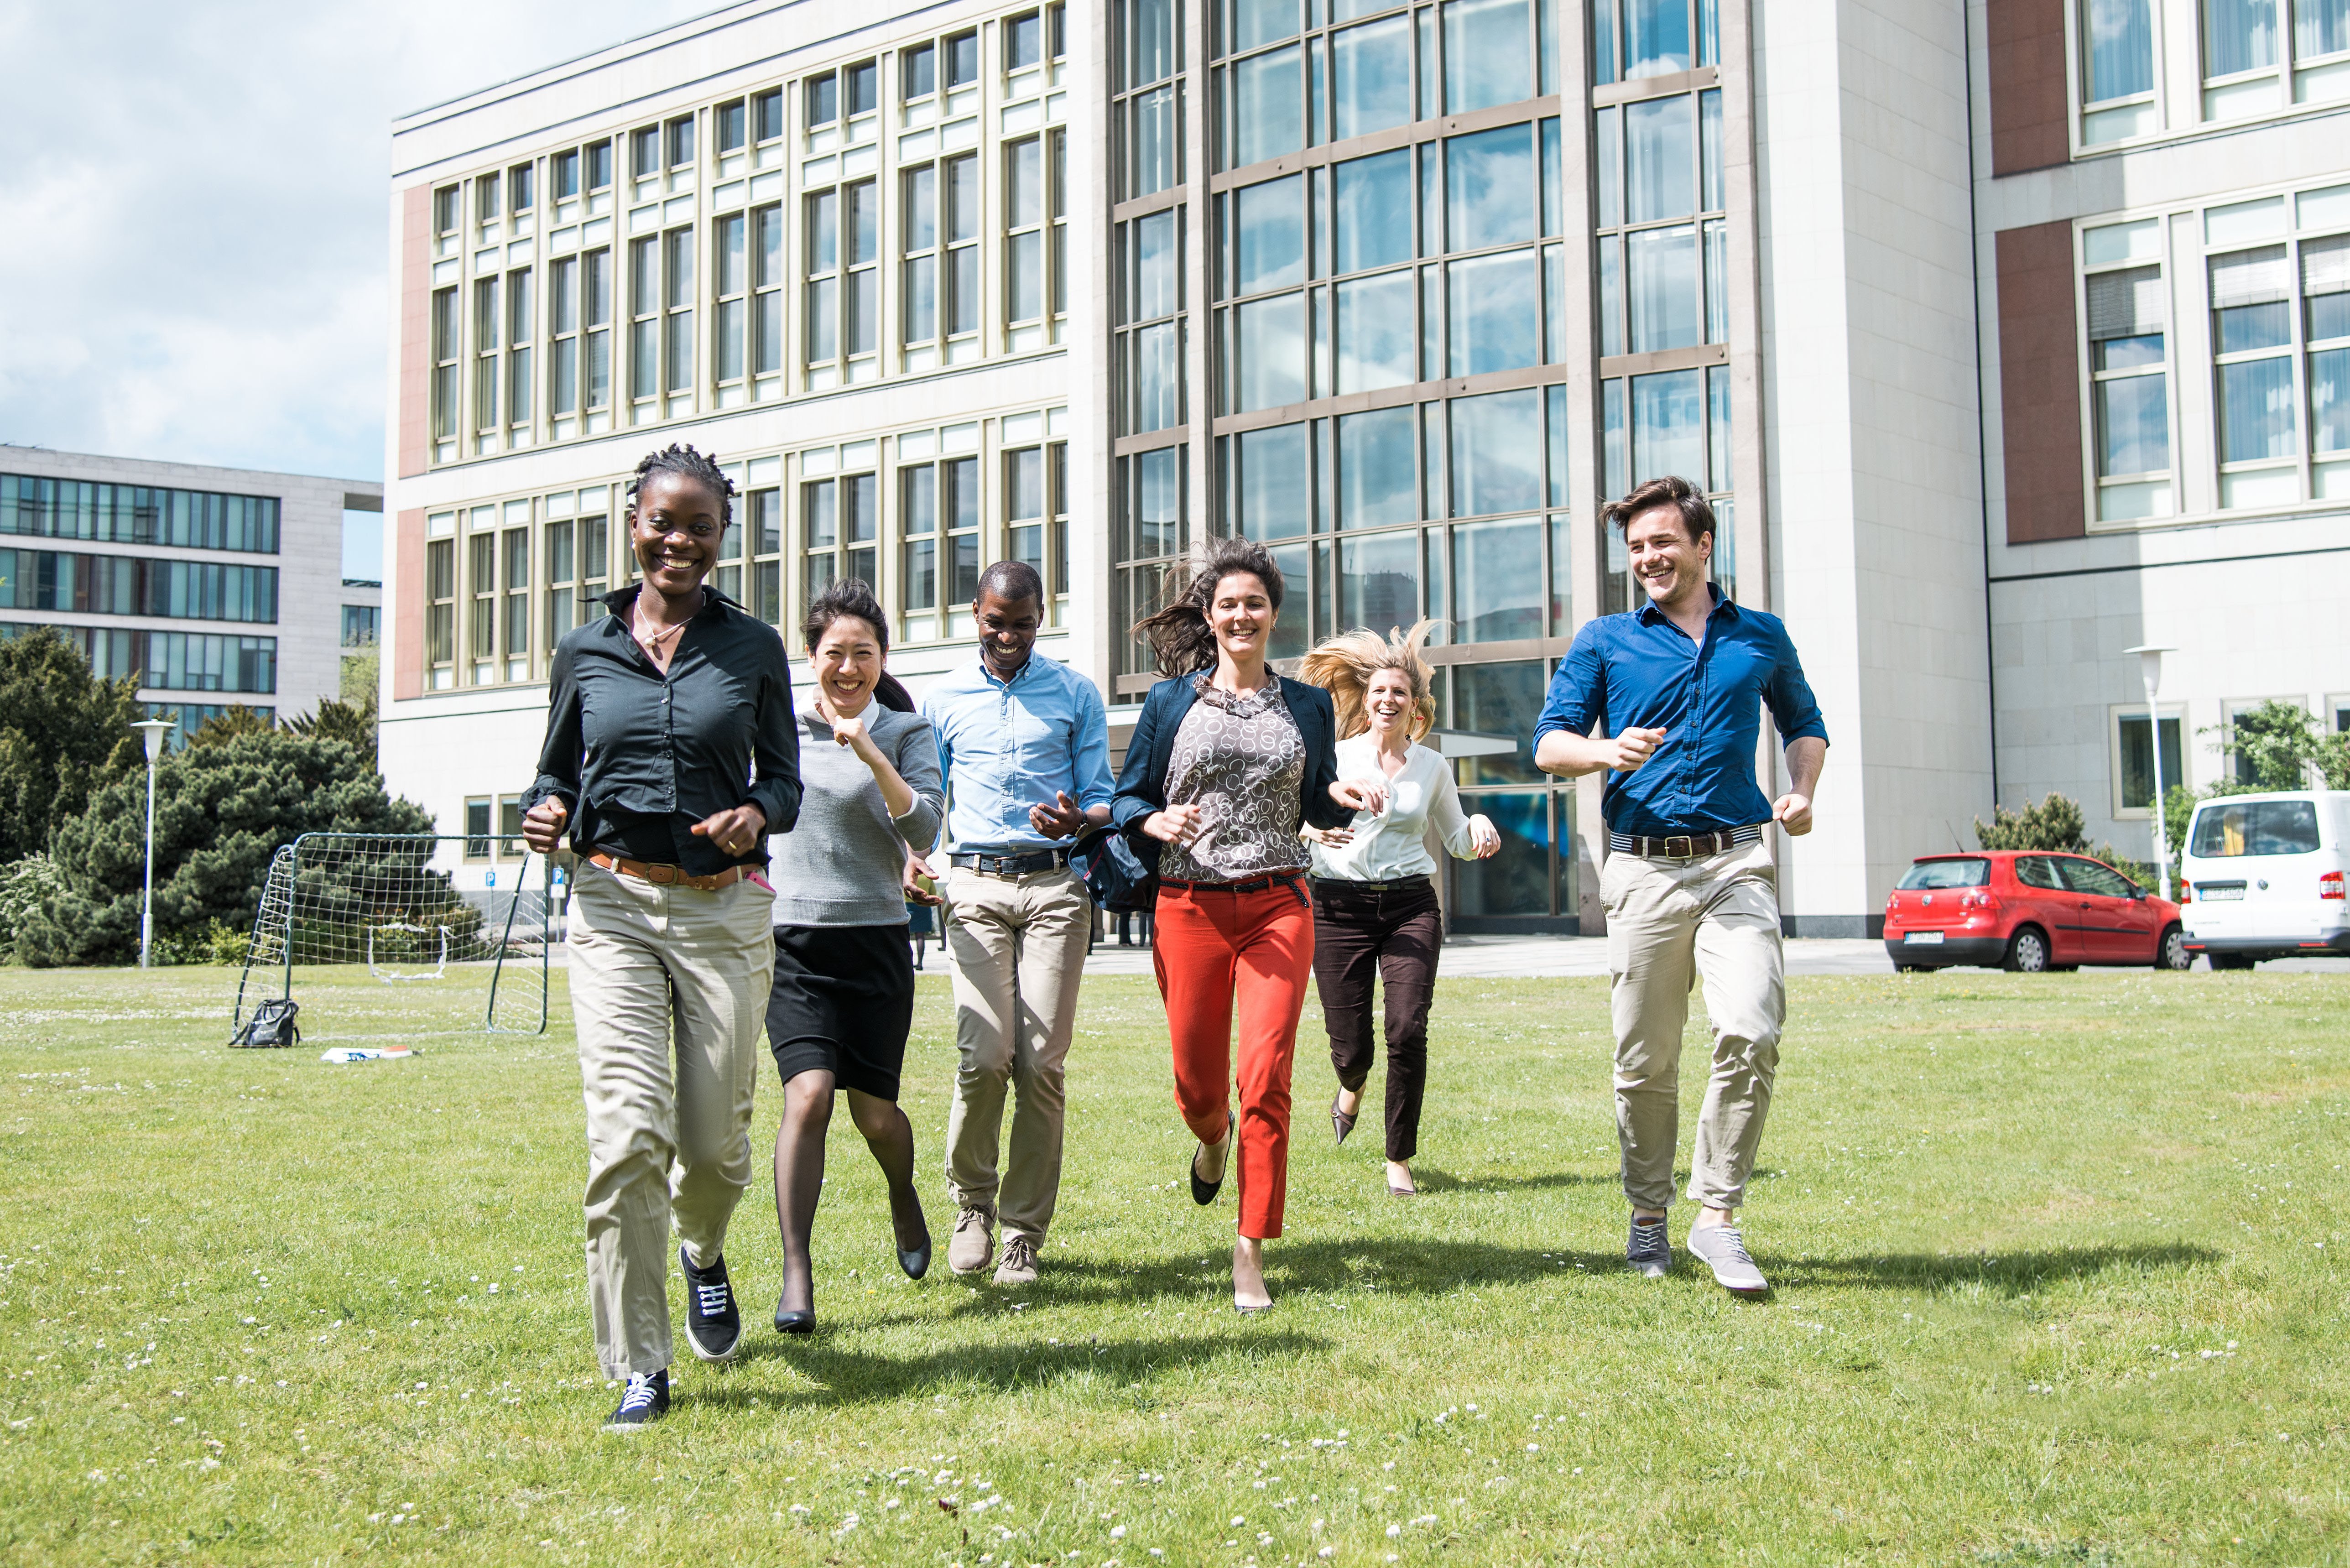 Six students running towards the camra on a green field. 